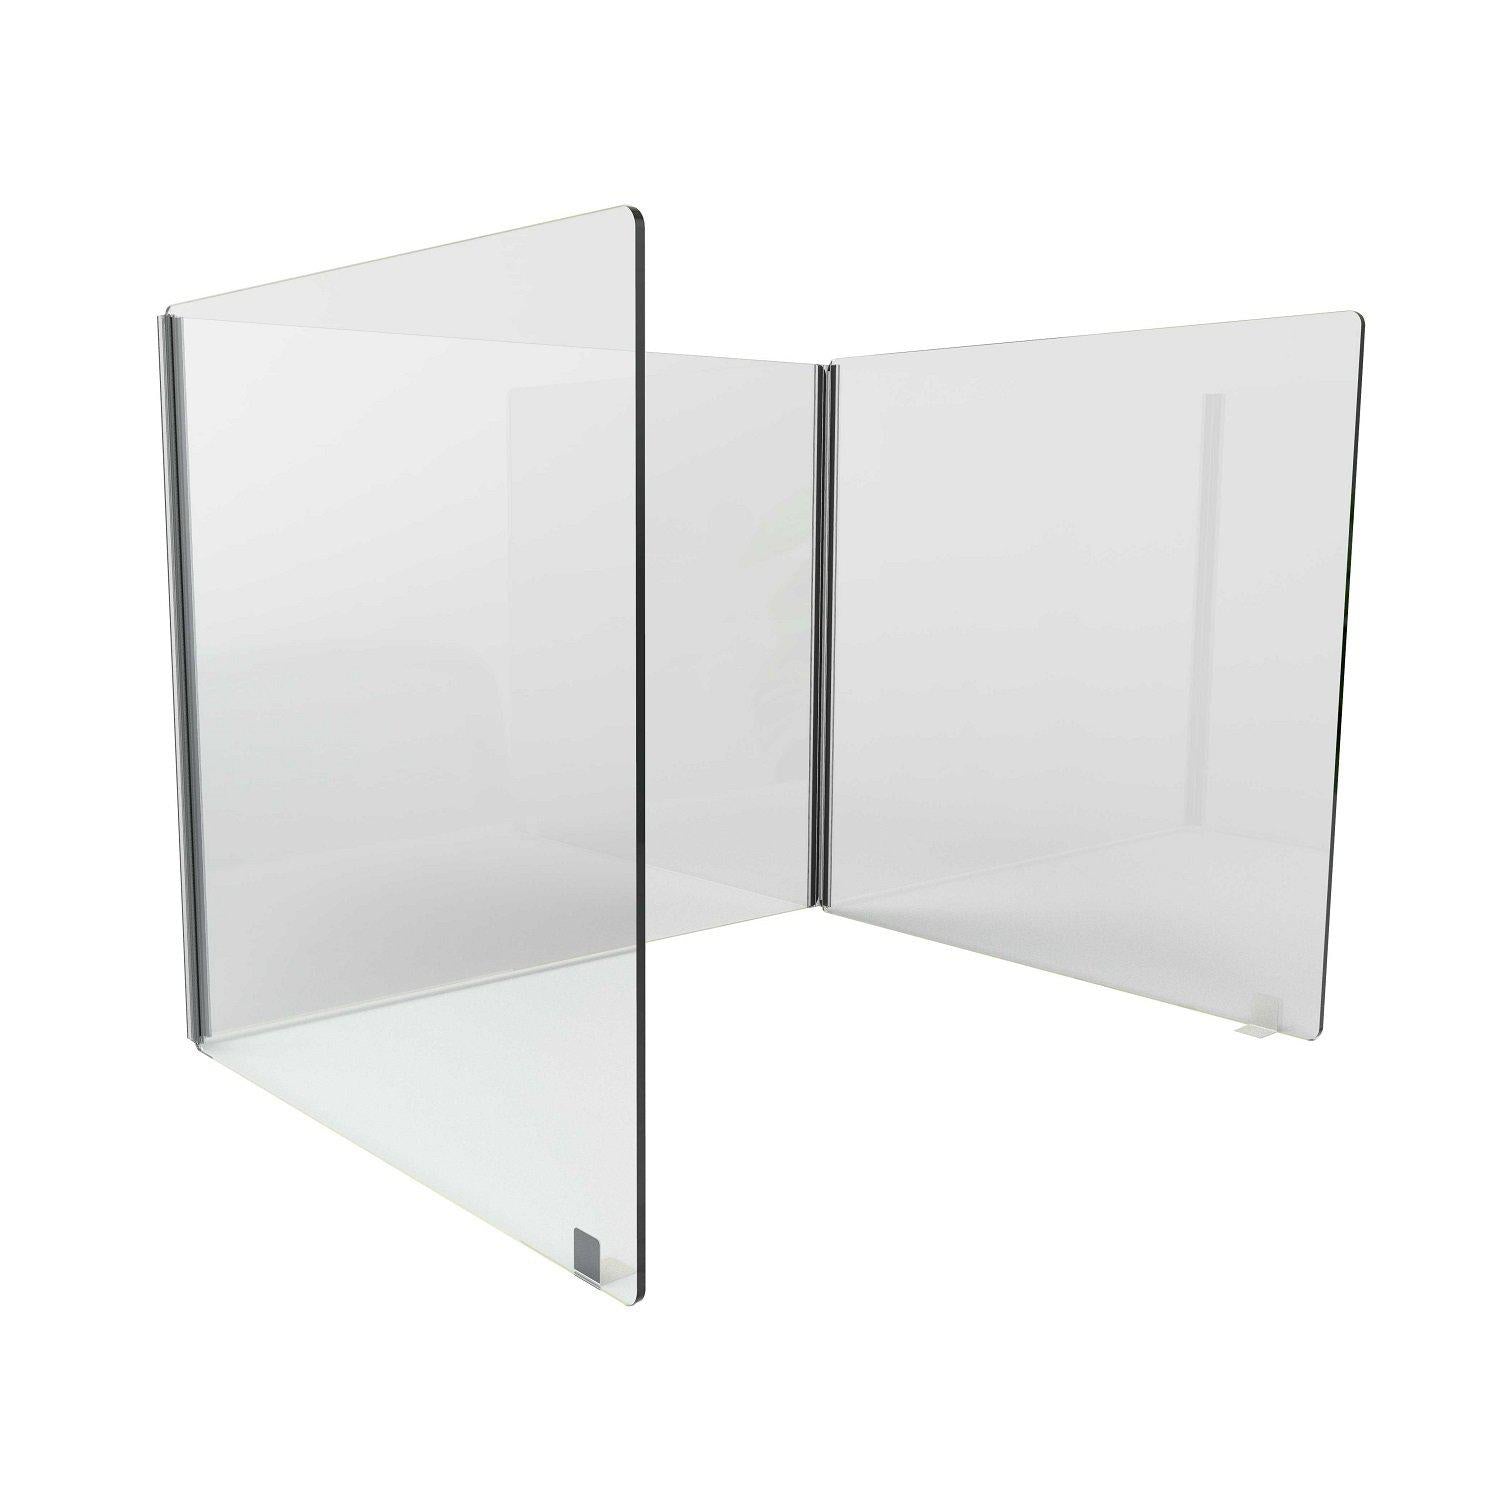 3-Sided Clear Thermoplastic Desktop Protection Screen/Sneeze Guard, 24”H x 48”W x 16”D